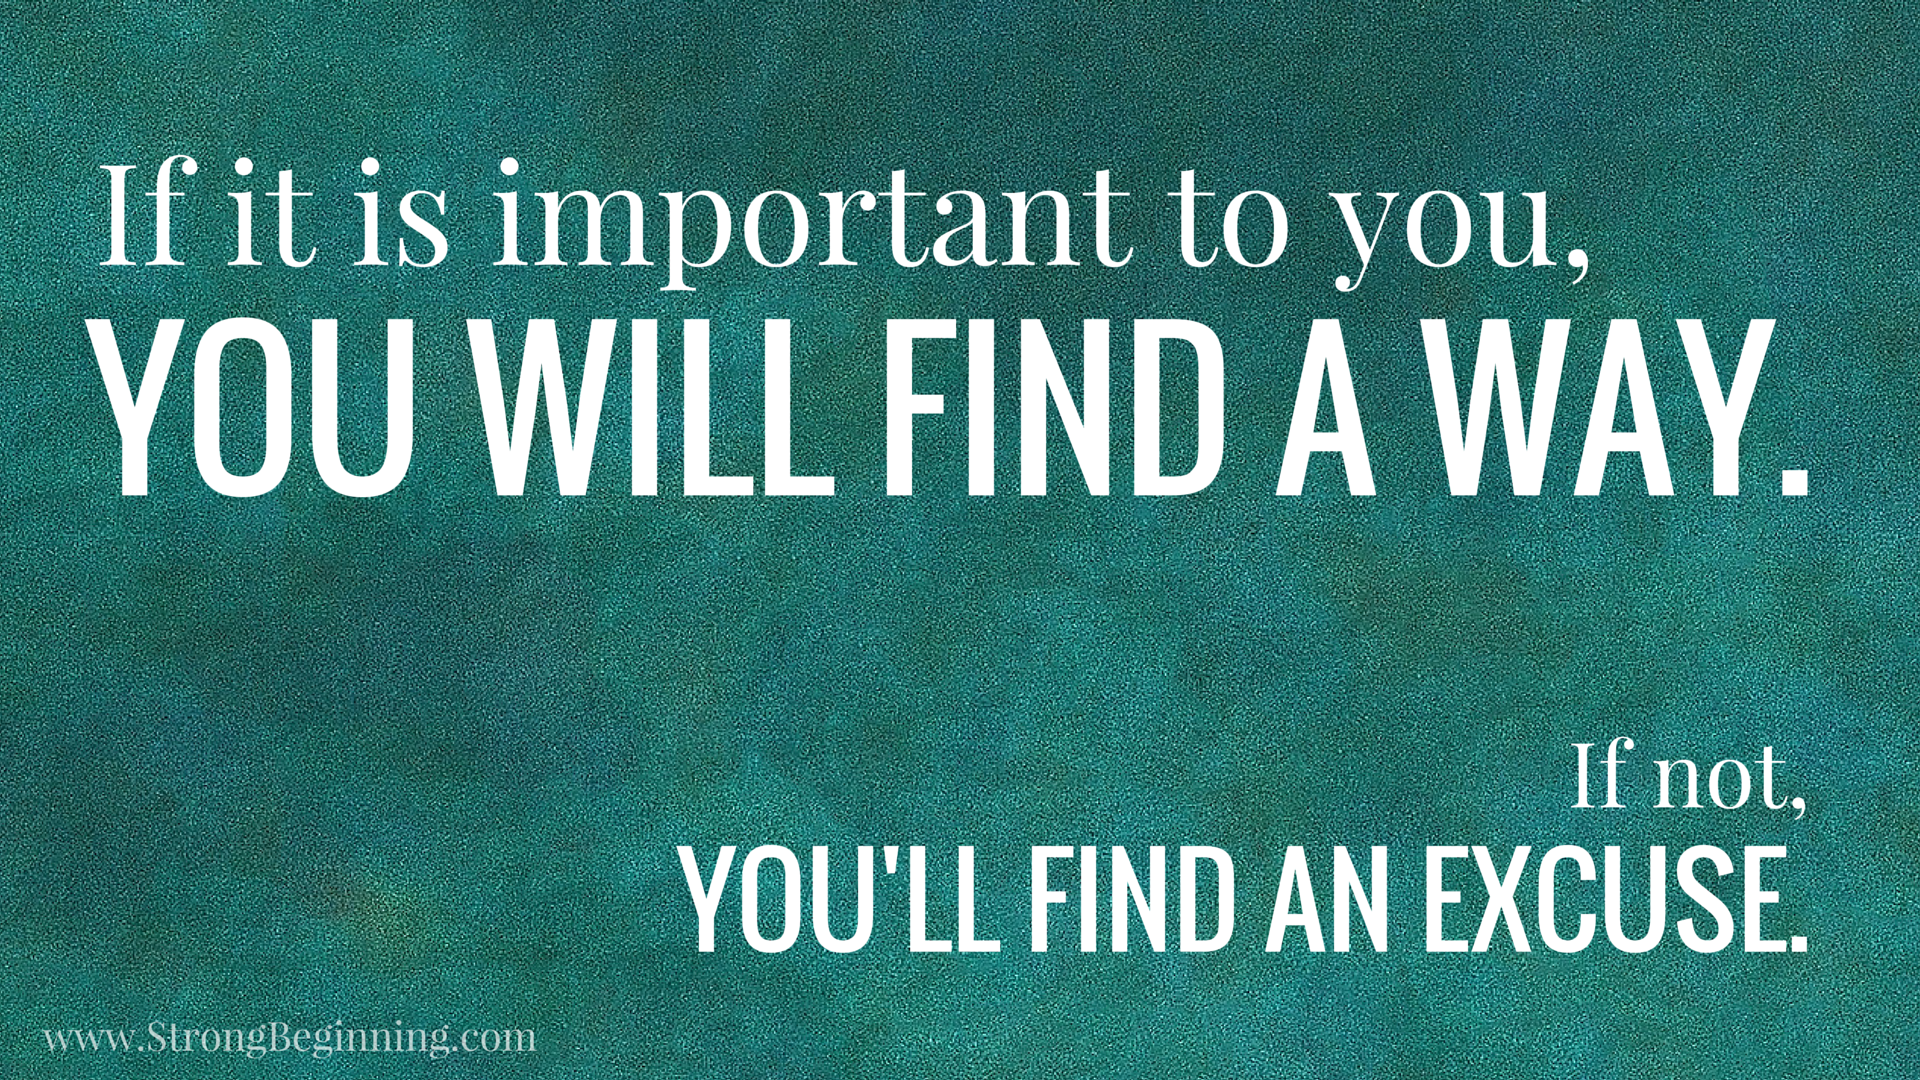 If it is important to you, you will find a way.